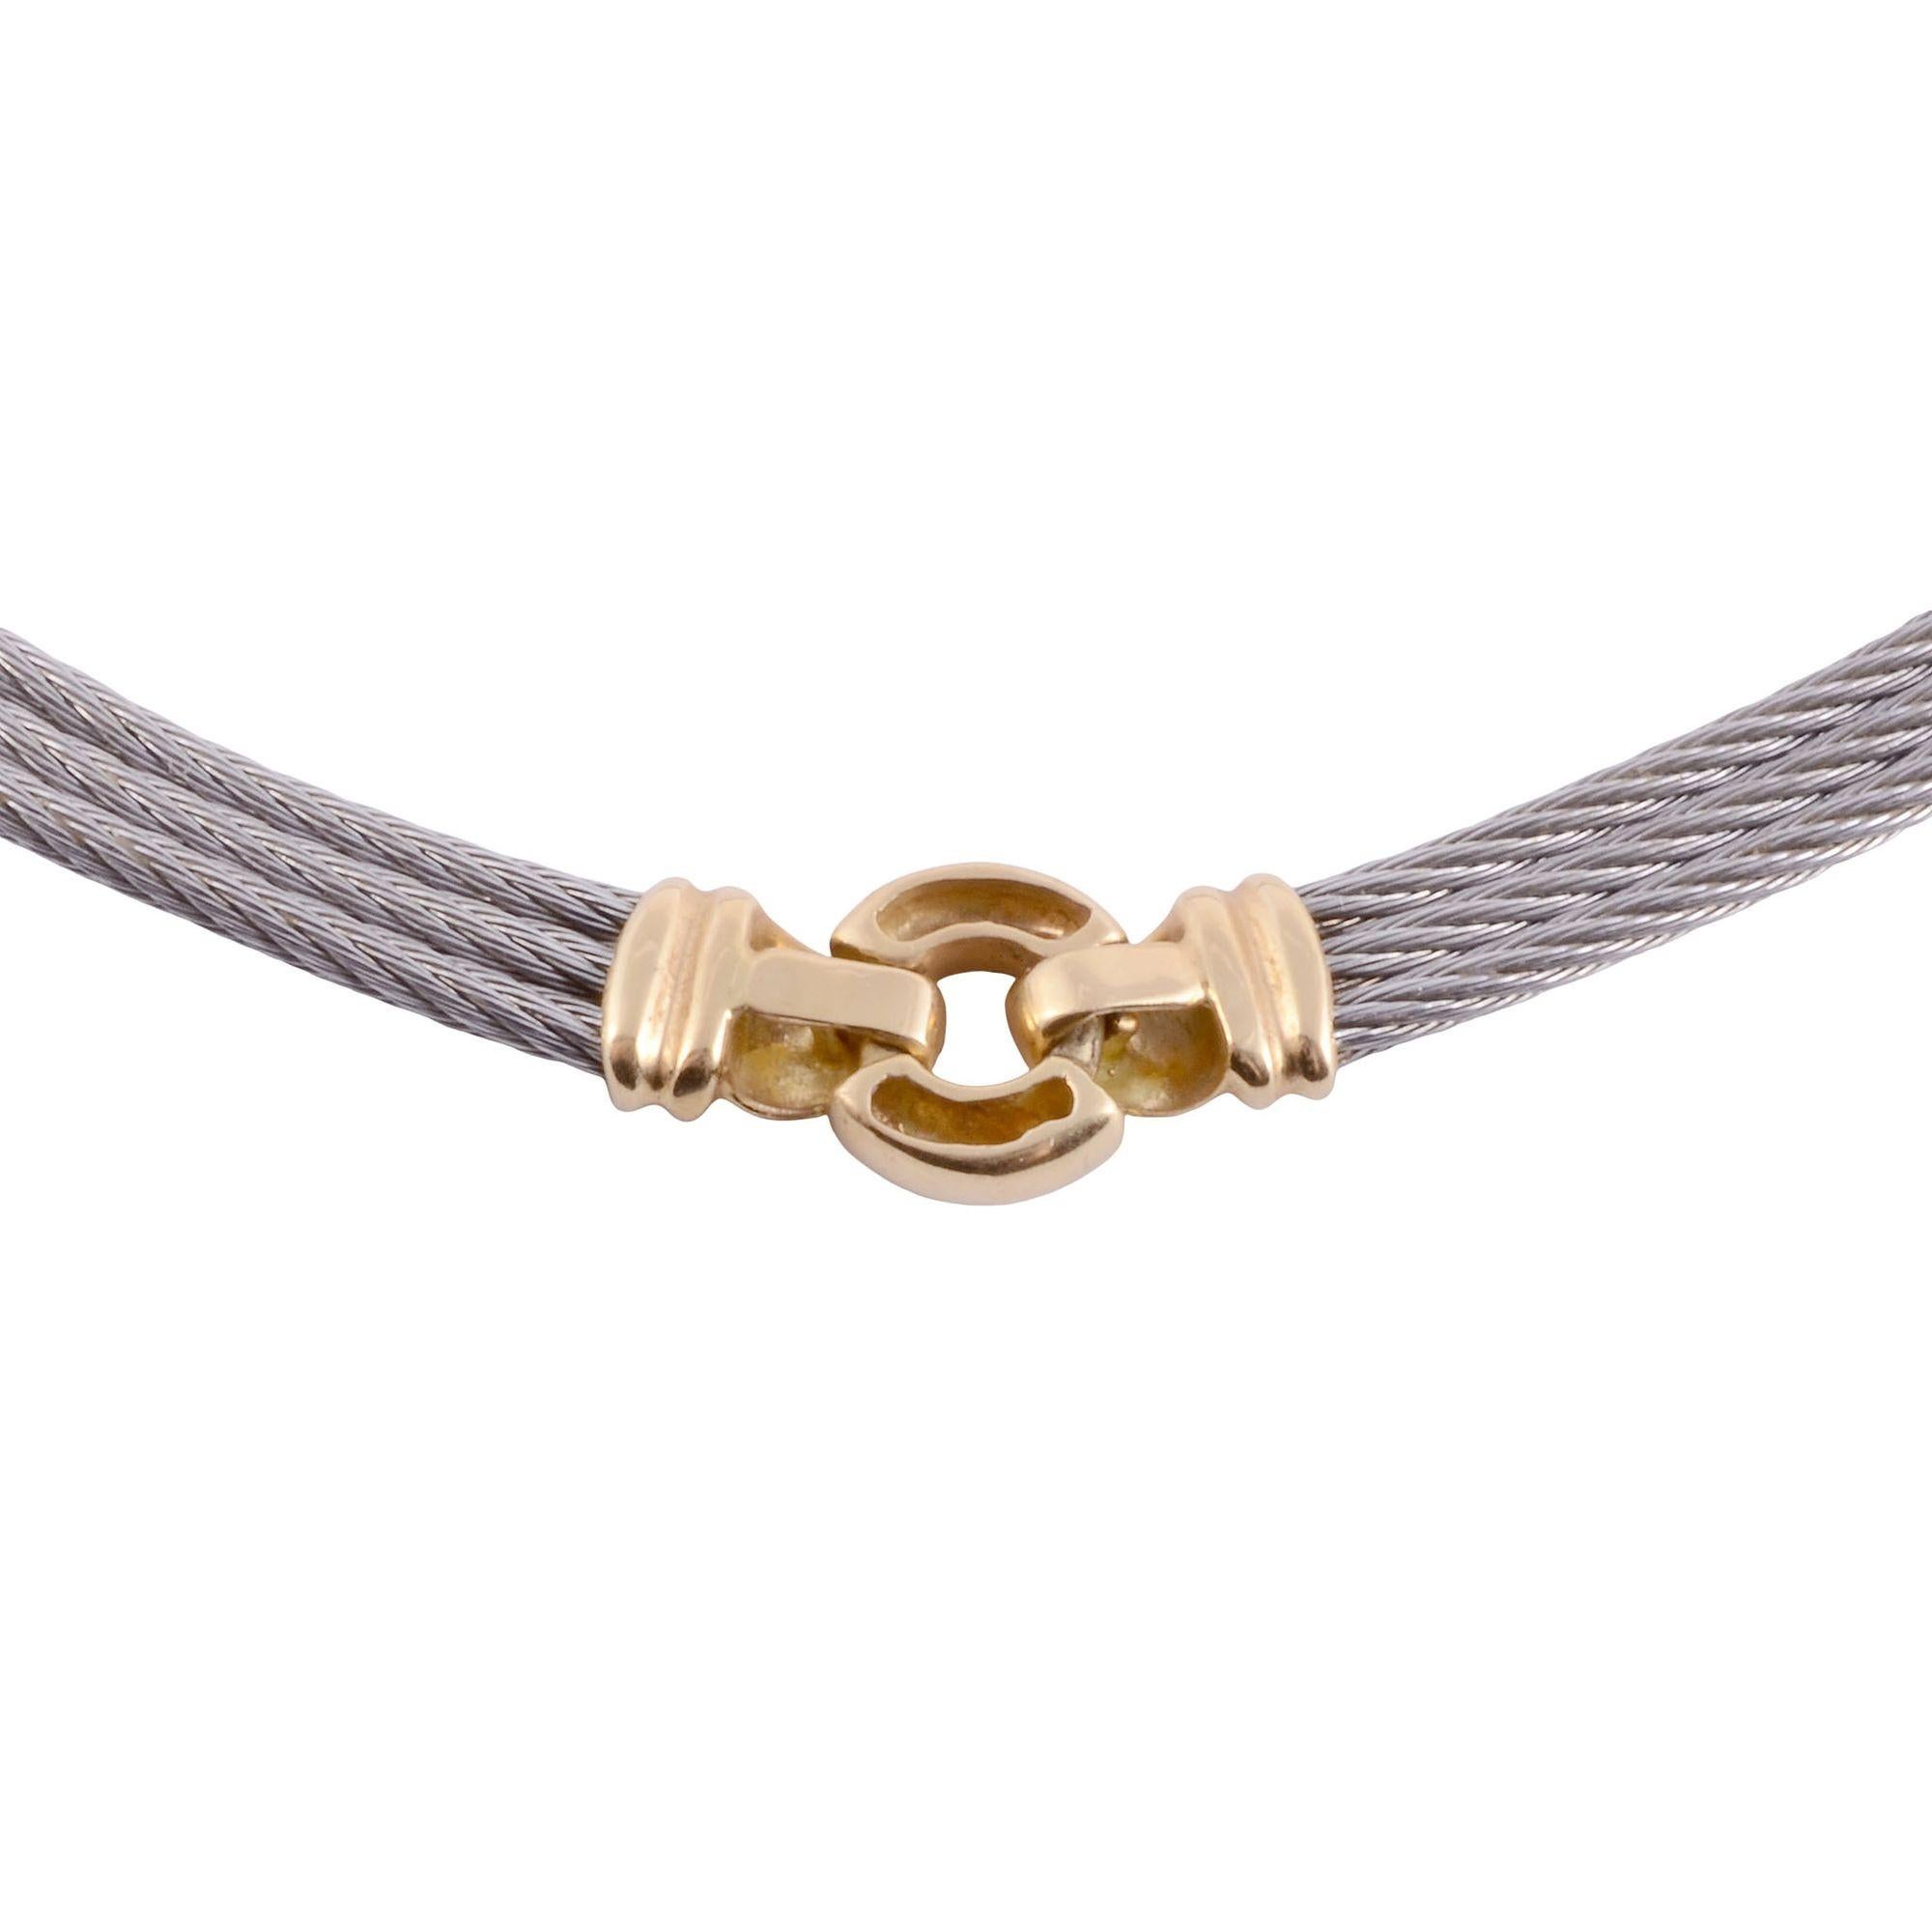 Estate 18K stainless steel necklace. This necklace features stainless steel rope strands with 18 karat yellow gold sections. The necklace is 14.5″ in length. [KIMH 2029 P]